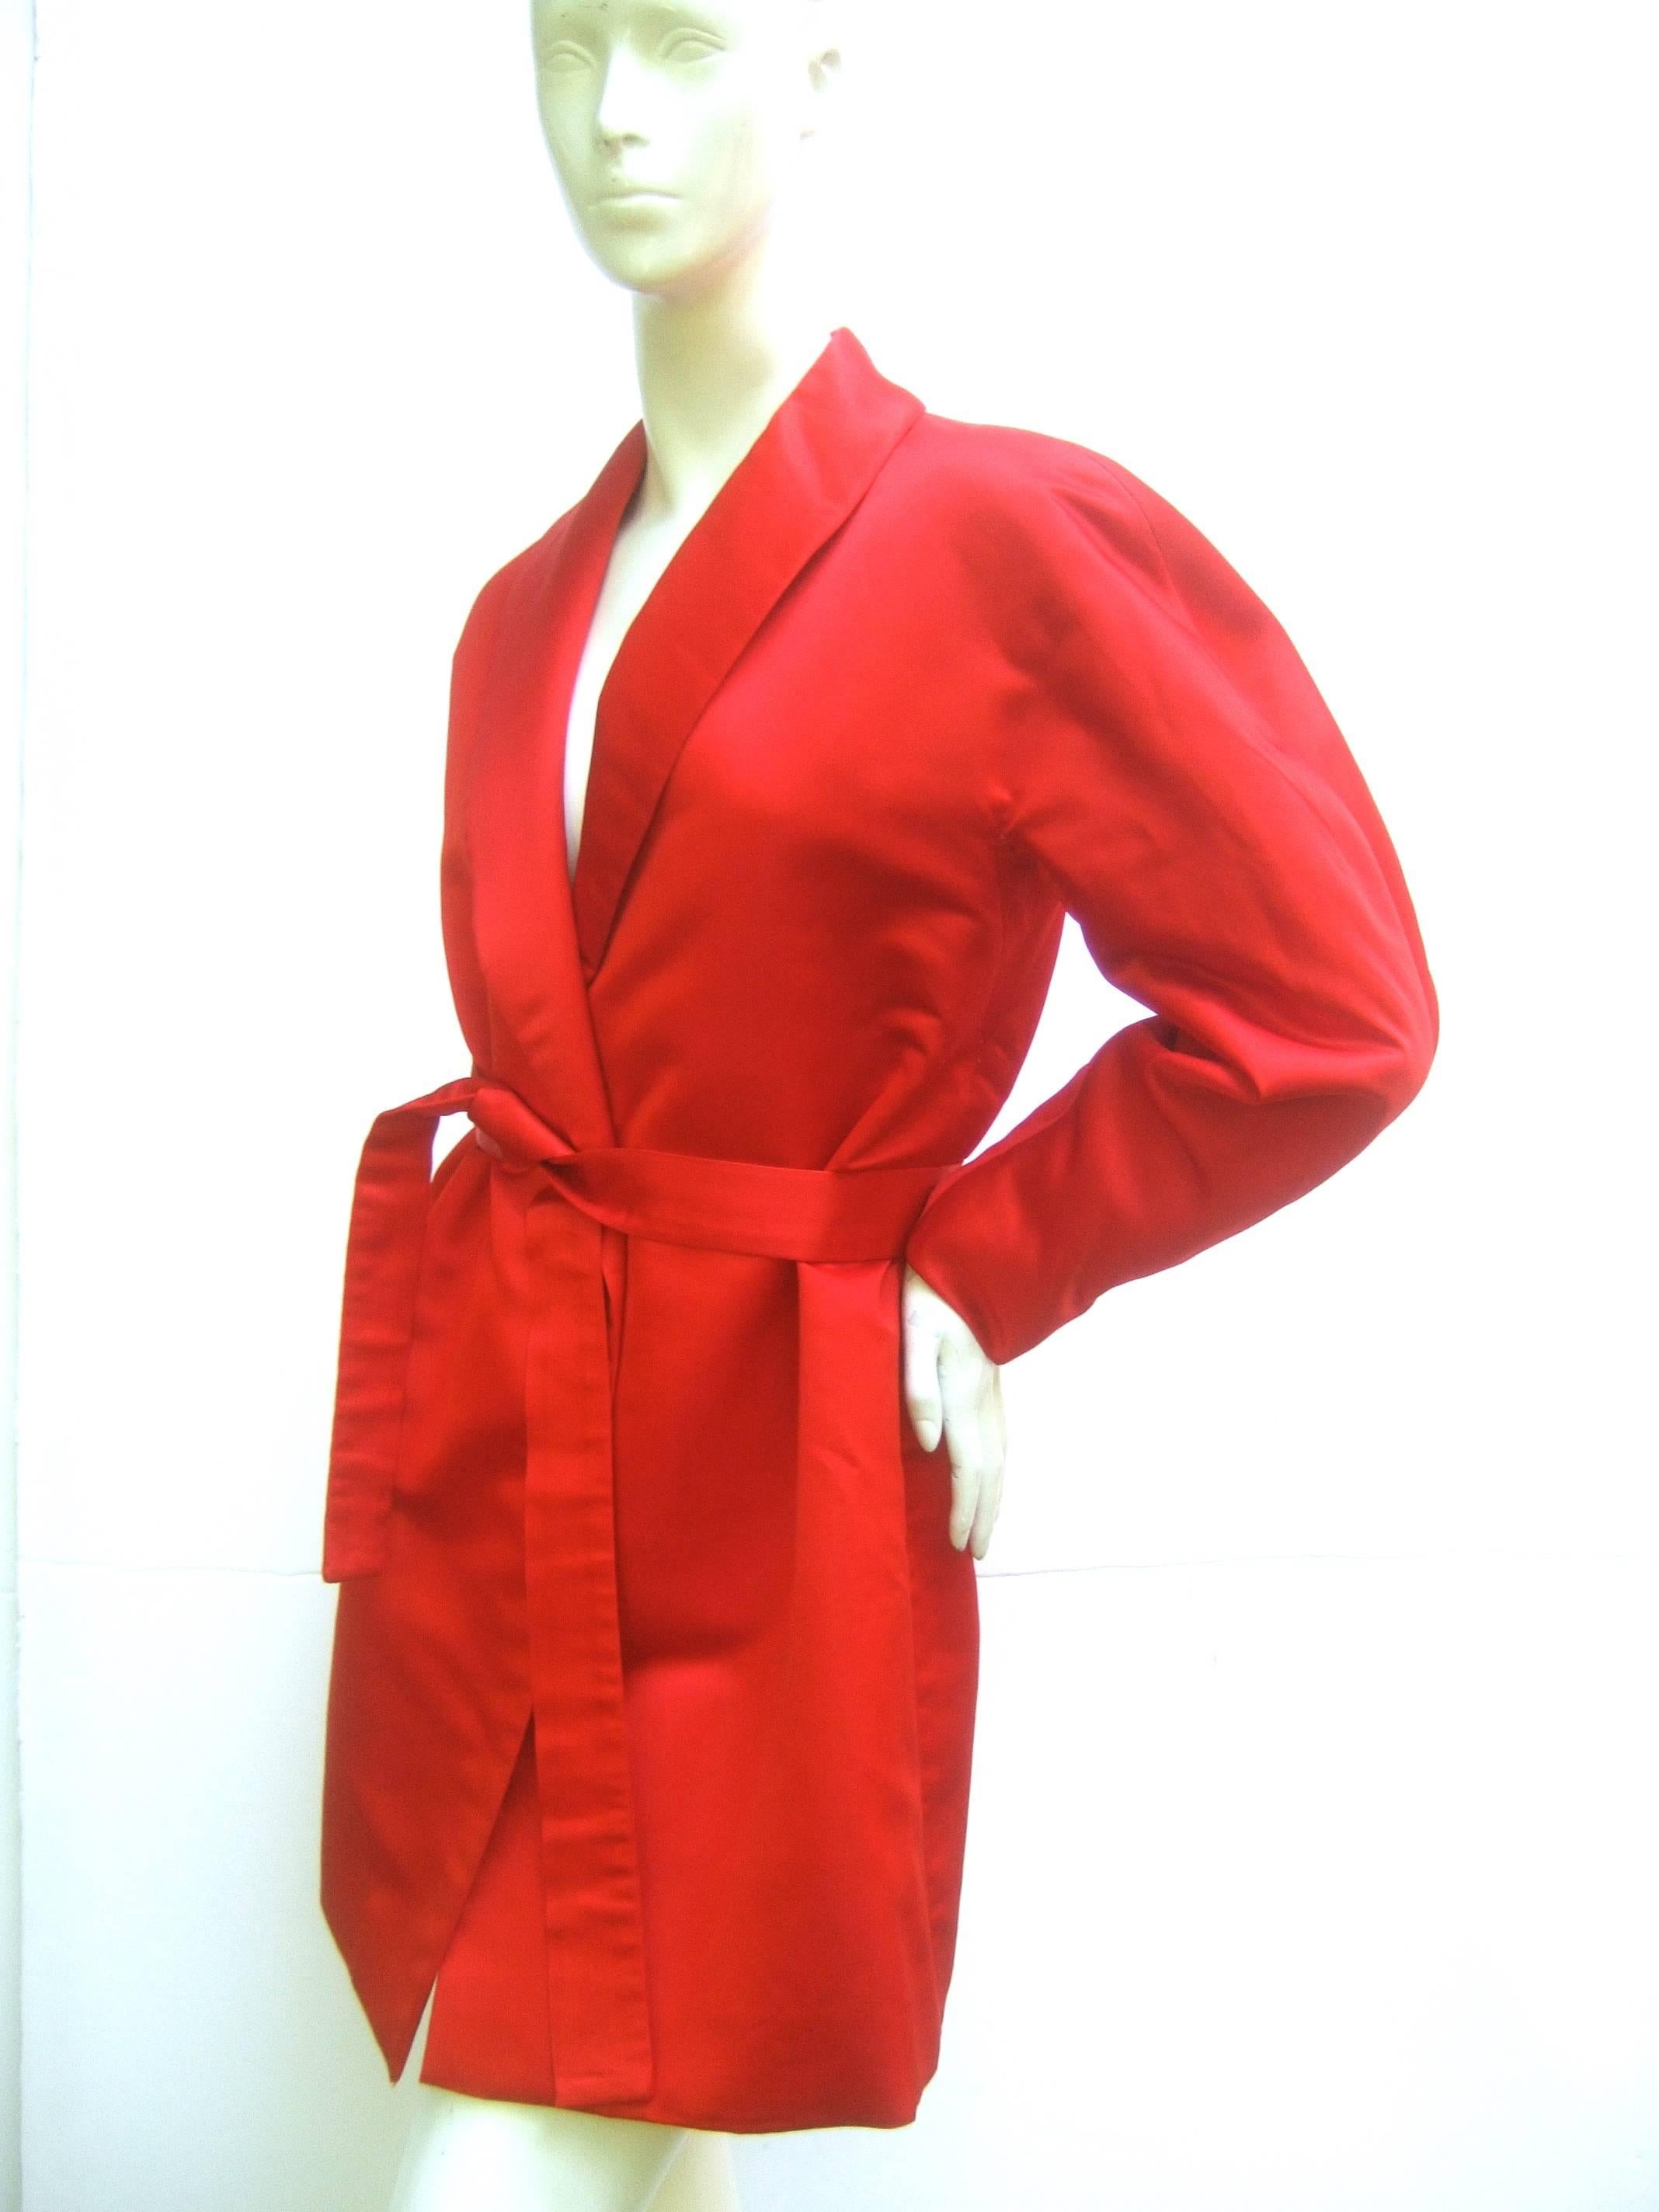 Incredible 1970's Halston couture wrap around belted jacket made of the finest satin and hand lined in silk. This is as sumptuous as vintage fashion comes! It just feels so wonderful to touch and wrap up in this. Totally channels the luxe Studio 54